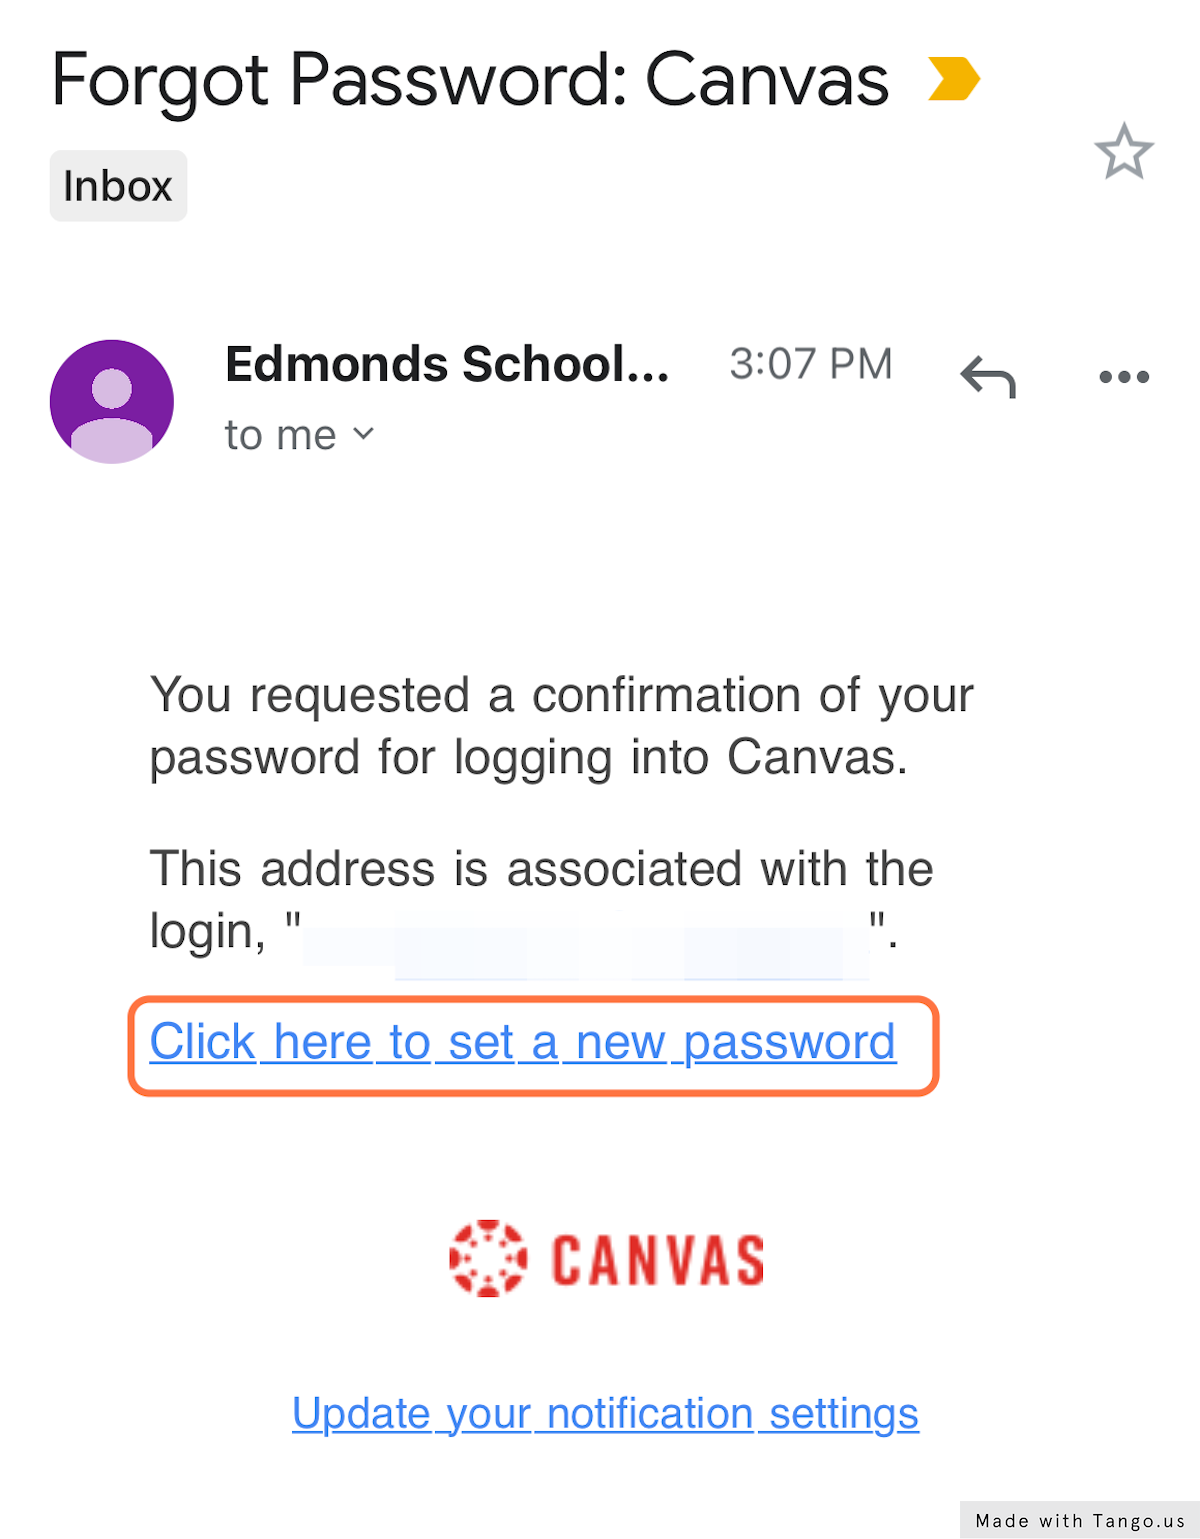 Once you receive the email, select the link in the message to set your password.